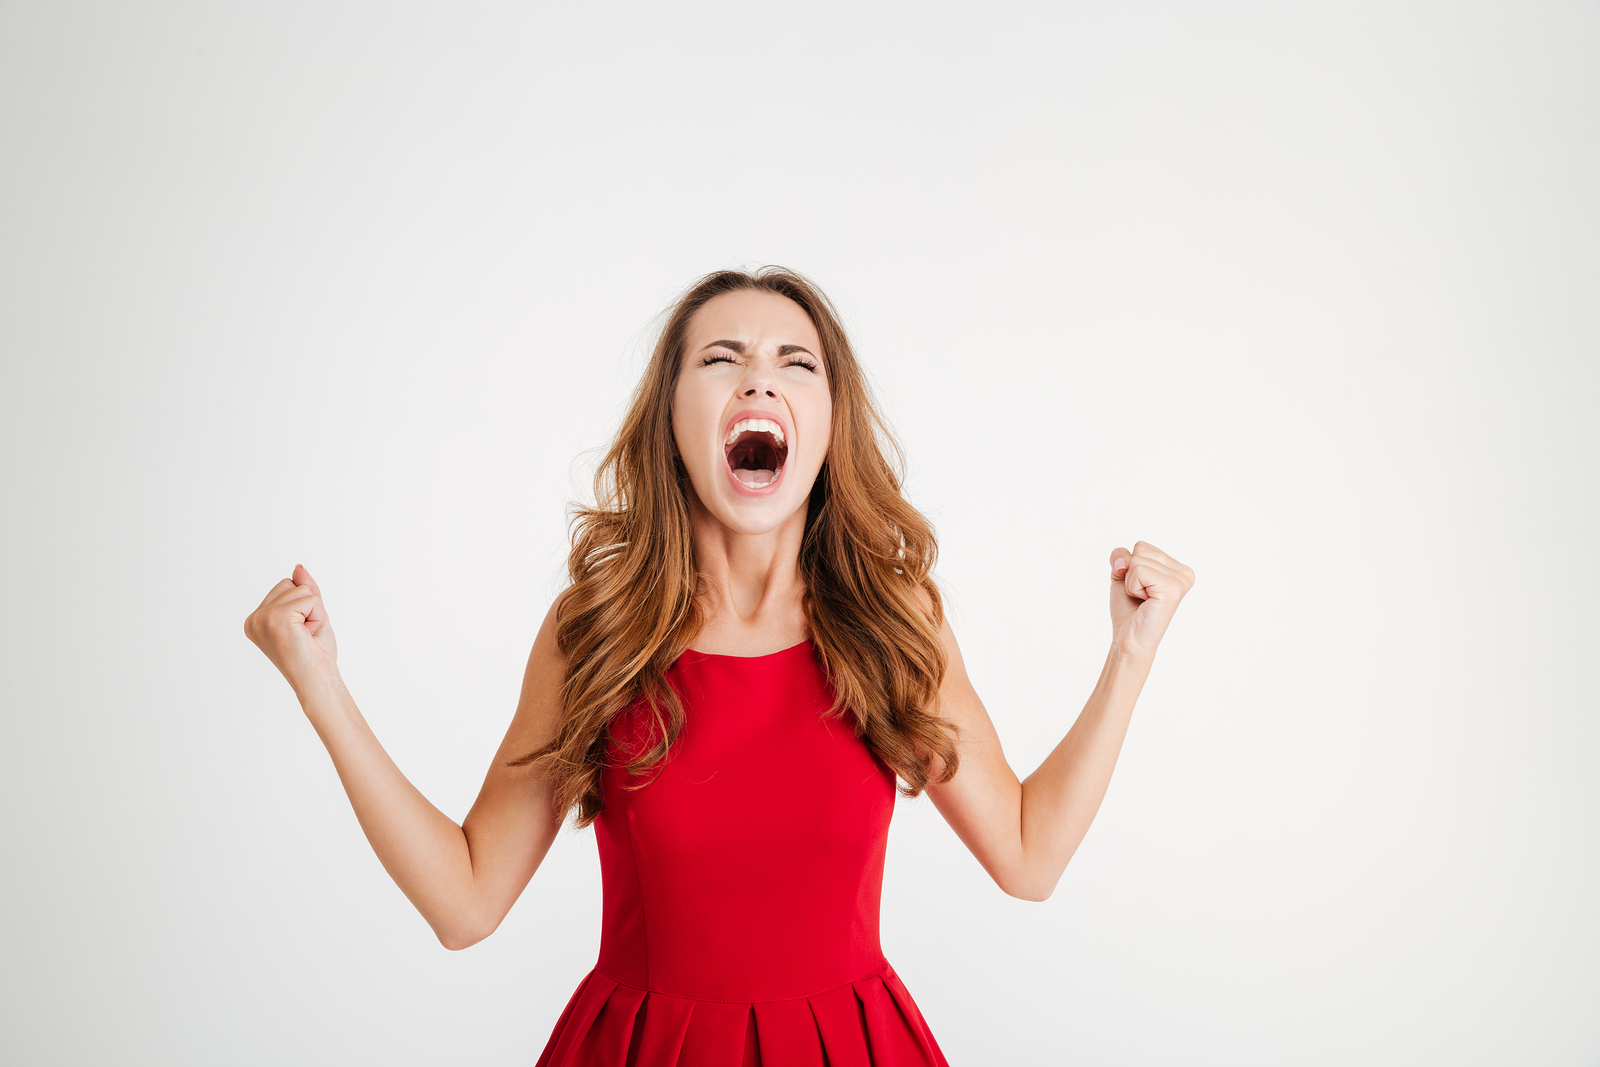 Mad furious young woman with raised hands standing and screaming